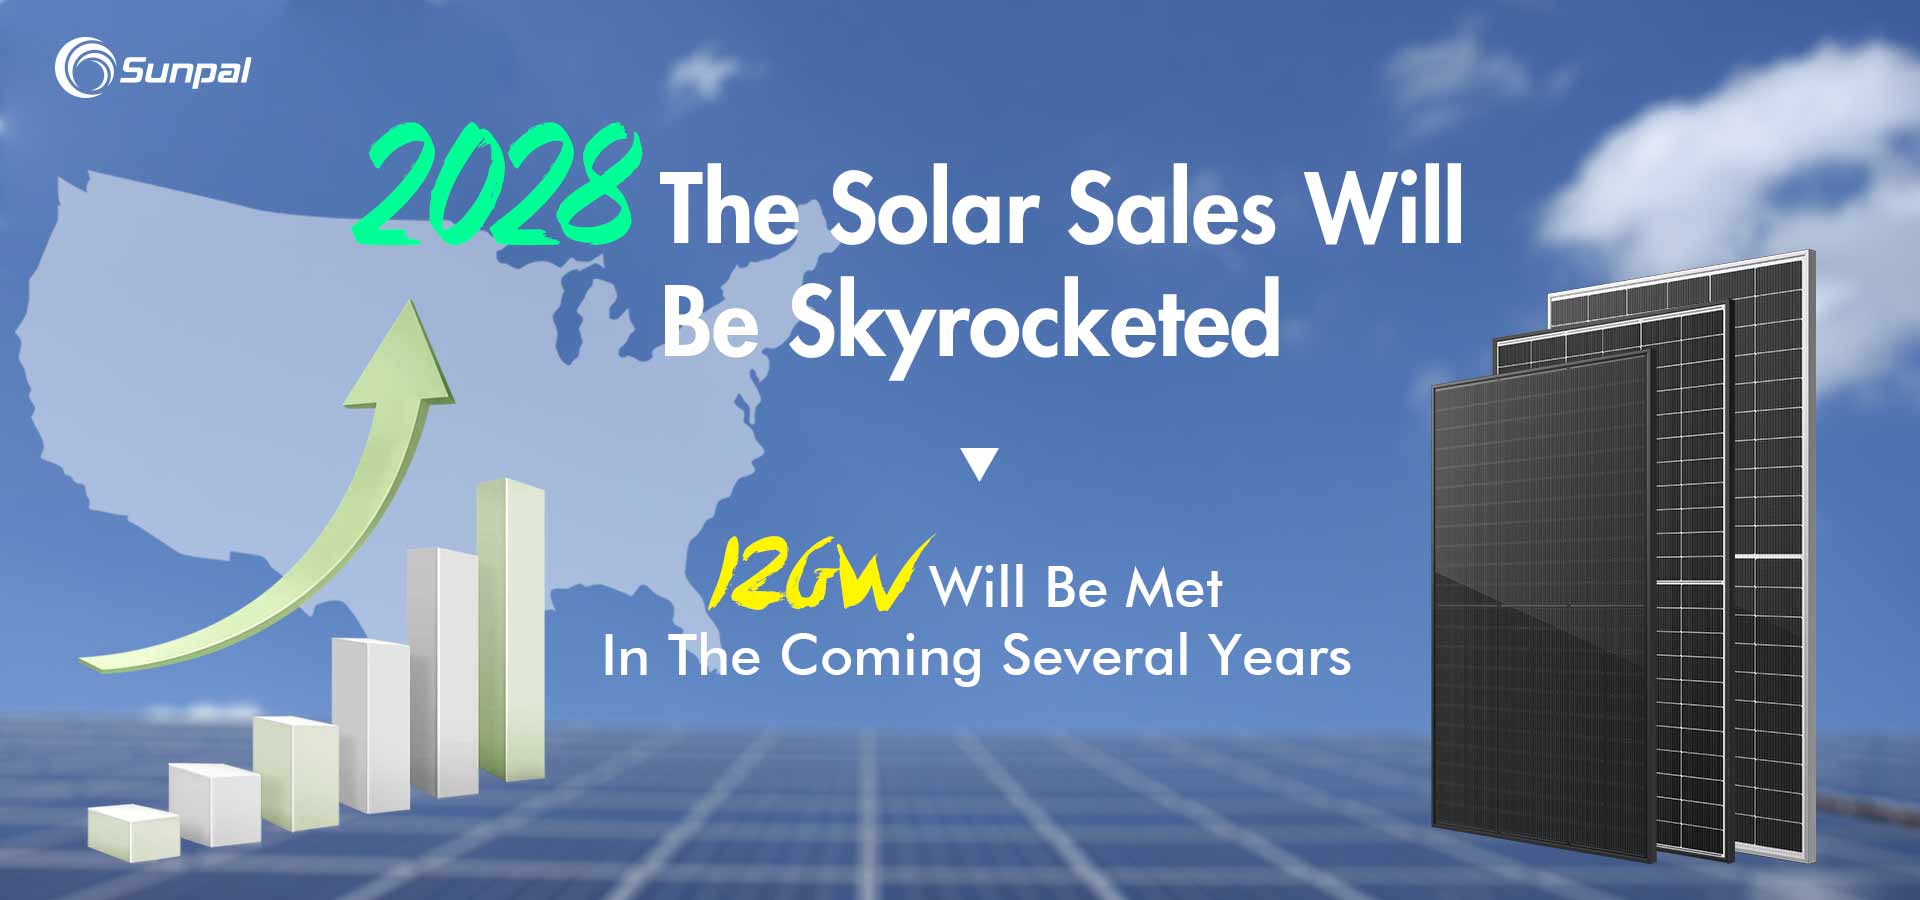 Commercial Solar Sales To Explode As US Market Reaches 14 GW By 2028